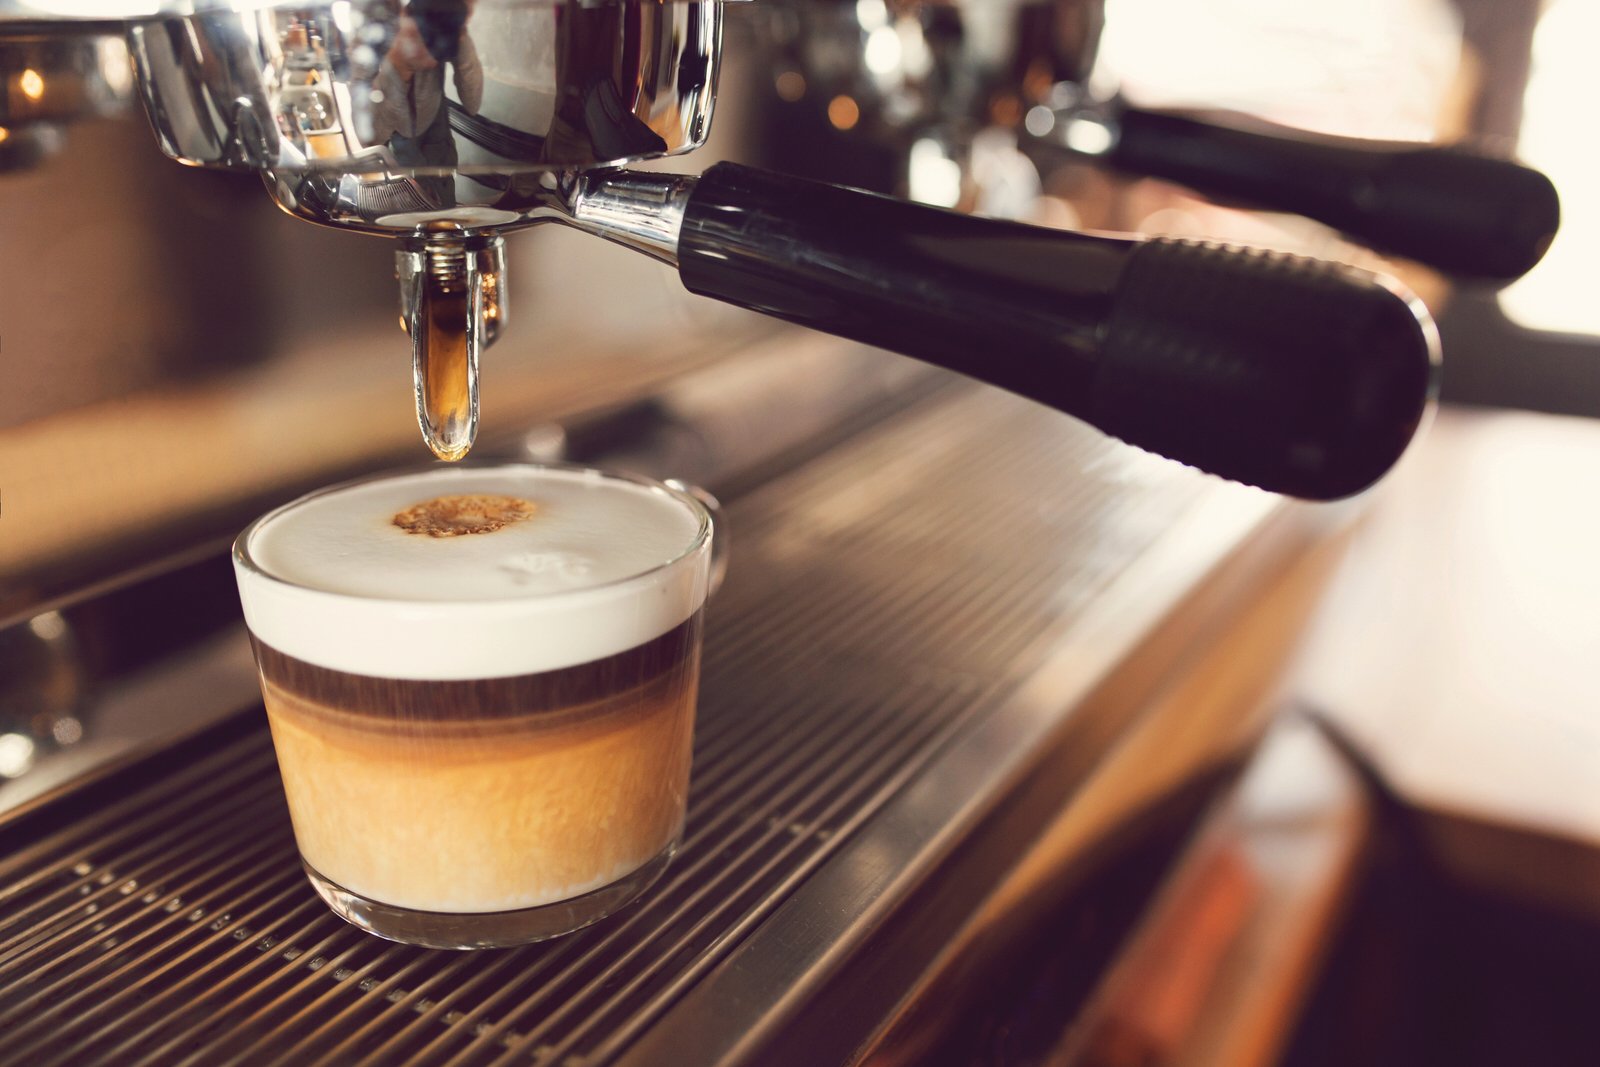 Here Are 10 Tips To Make Coffee More Delicious | Born Realist